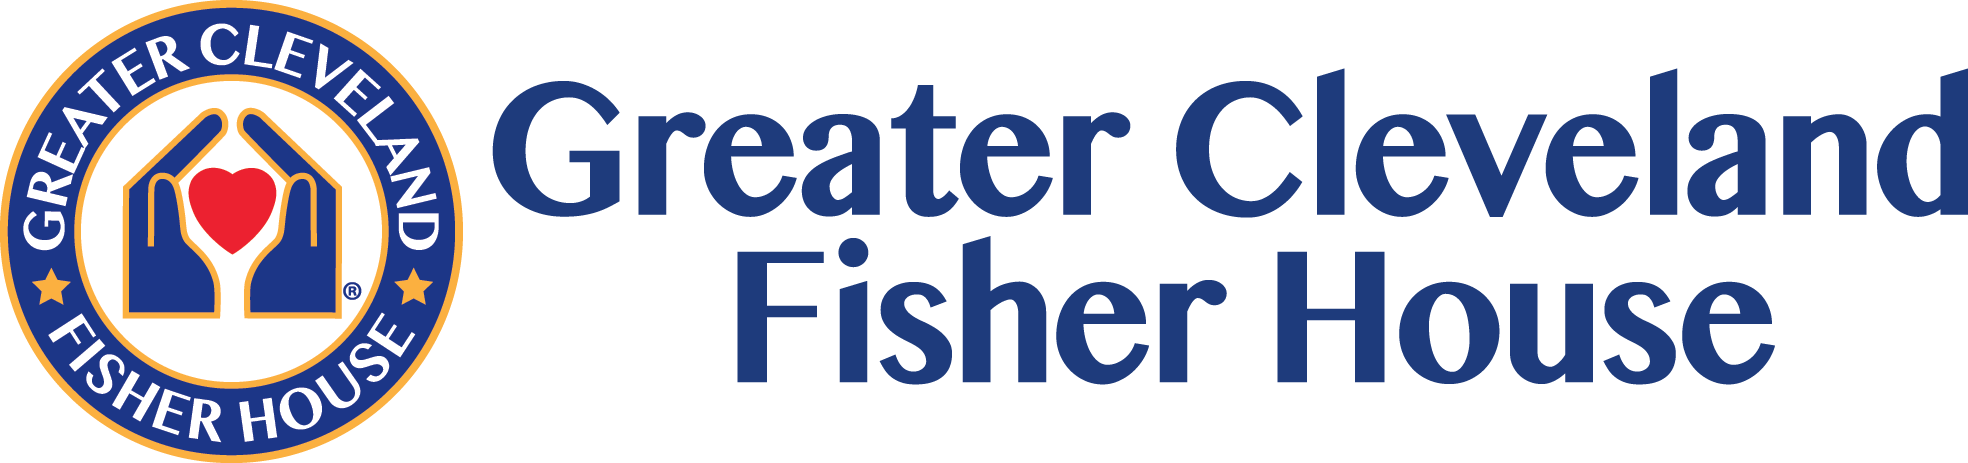 Greater Cleveland Fisher House Logo